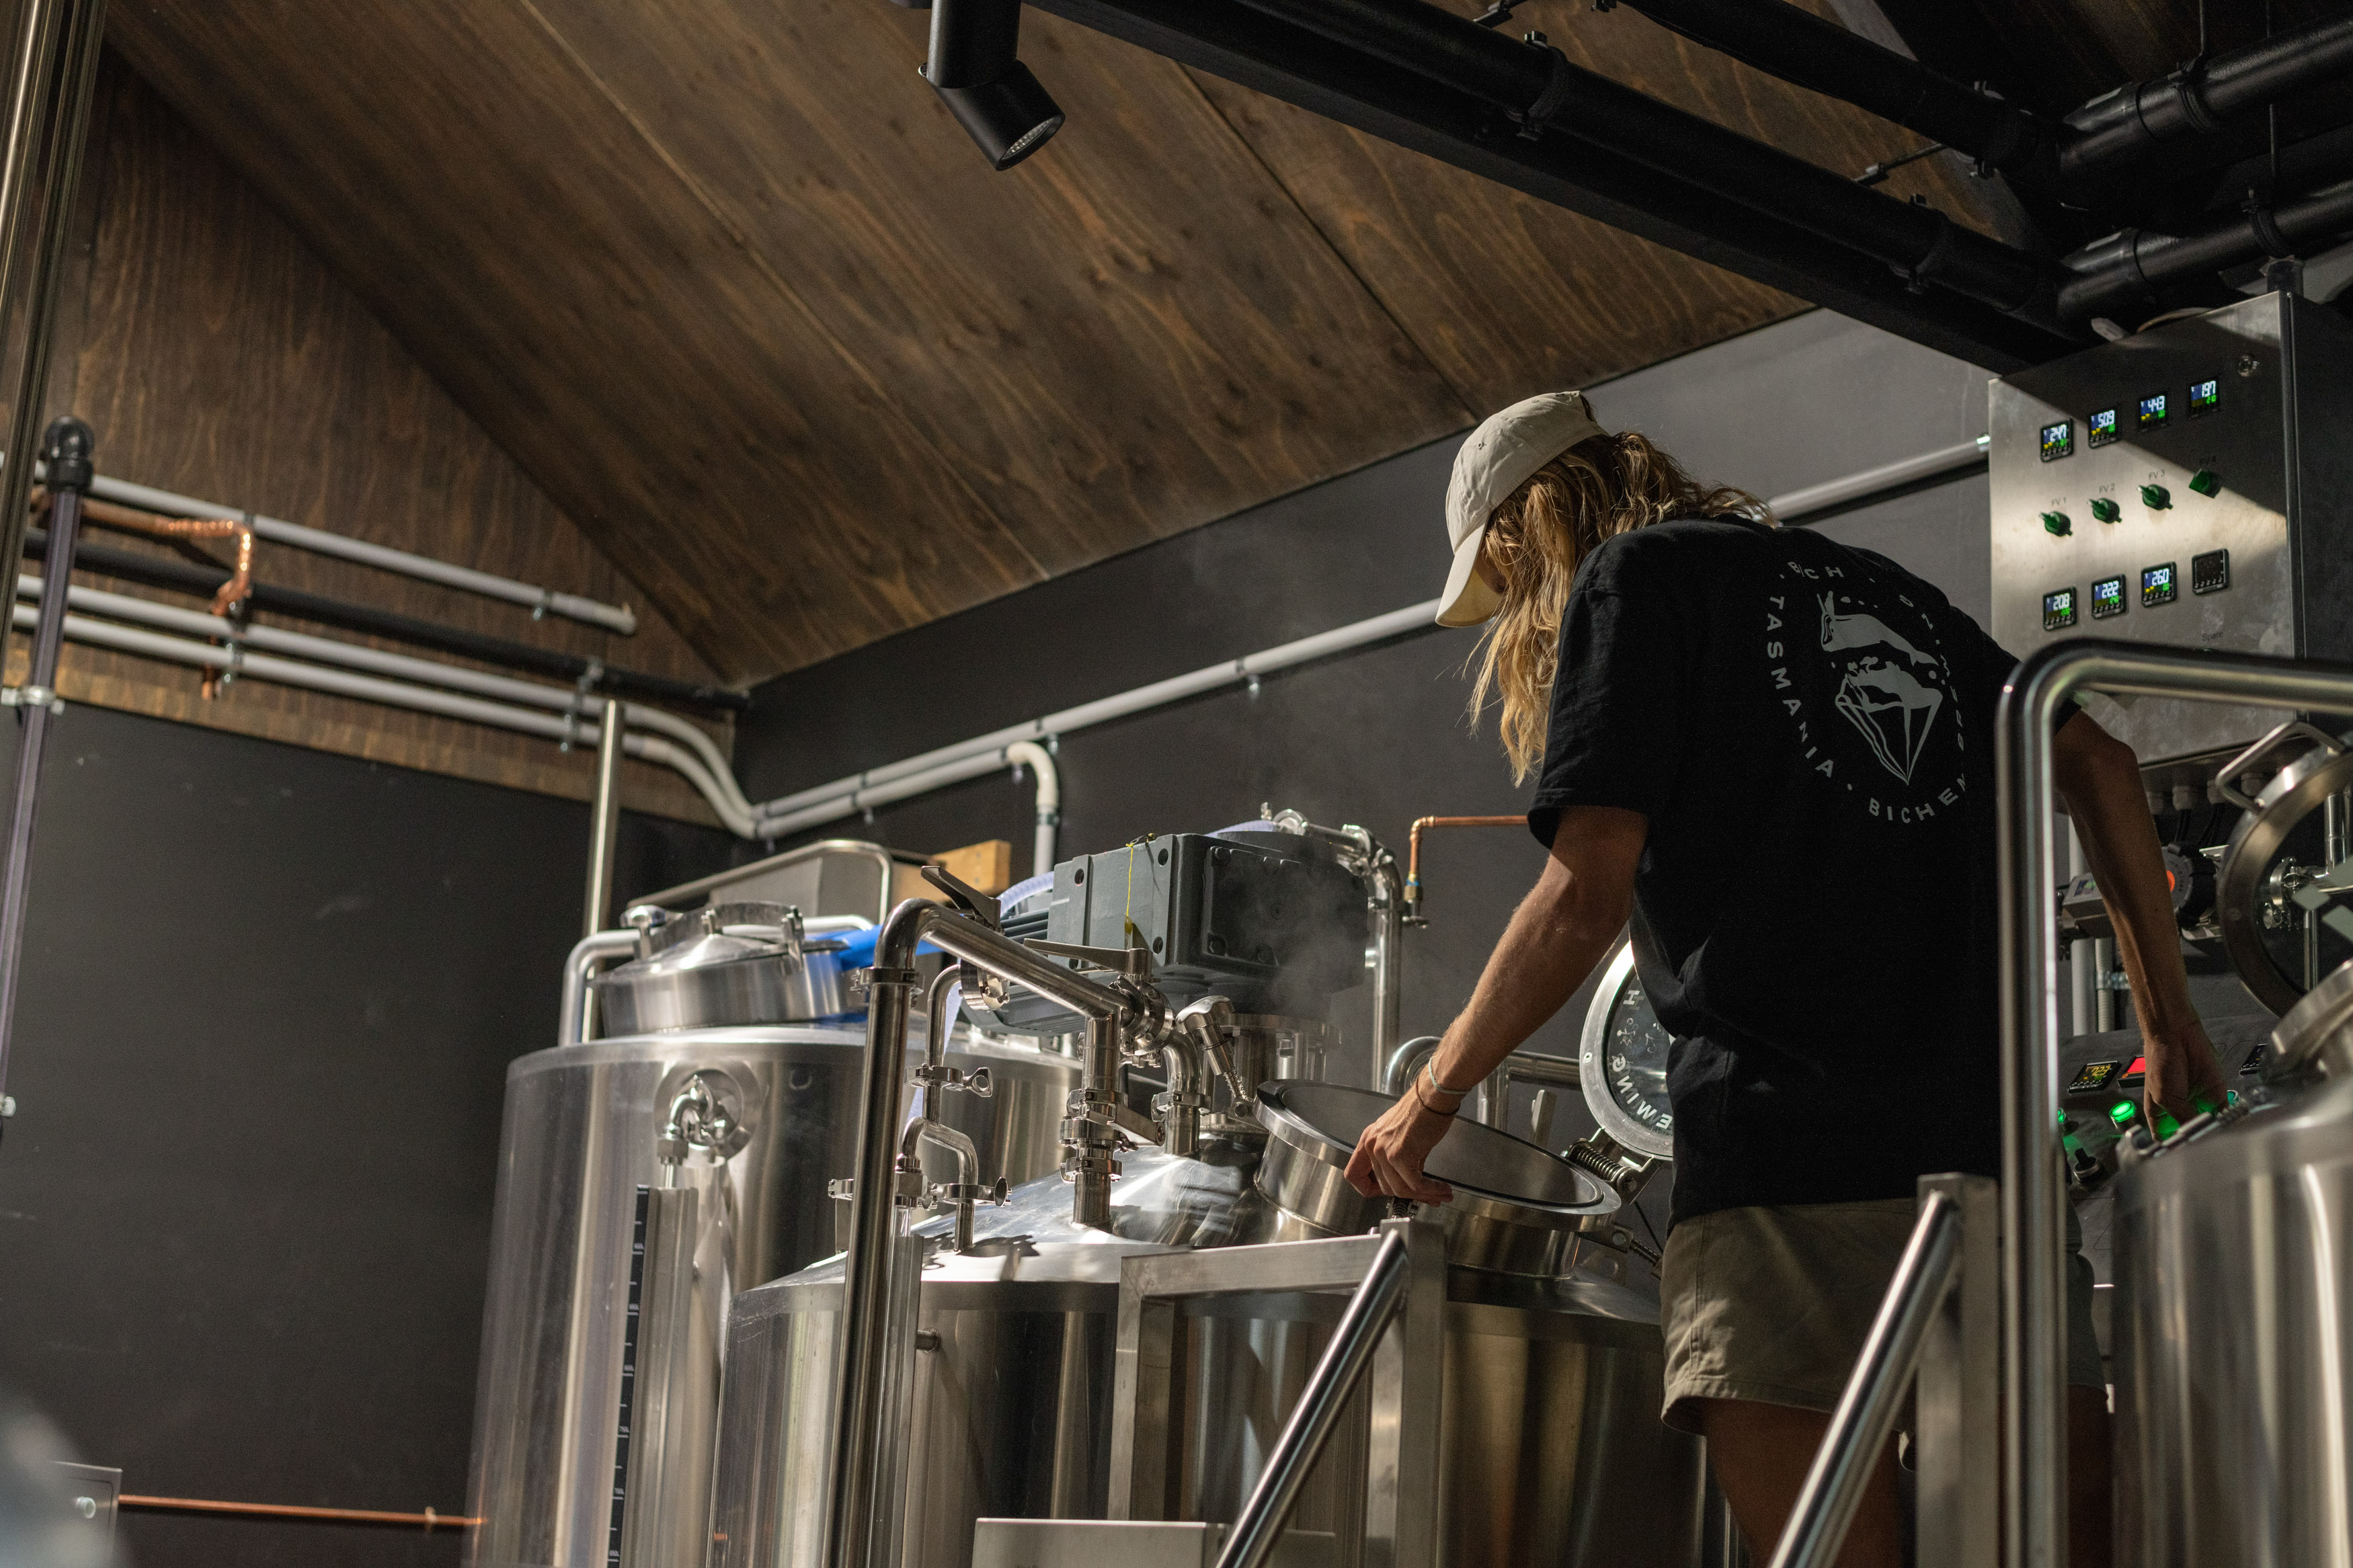 An image of a person adjusting the brewing equipment.